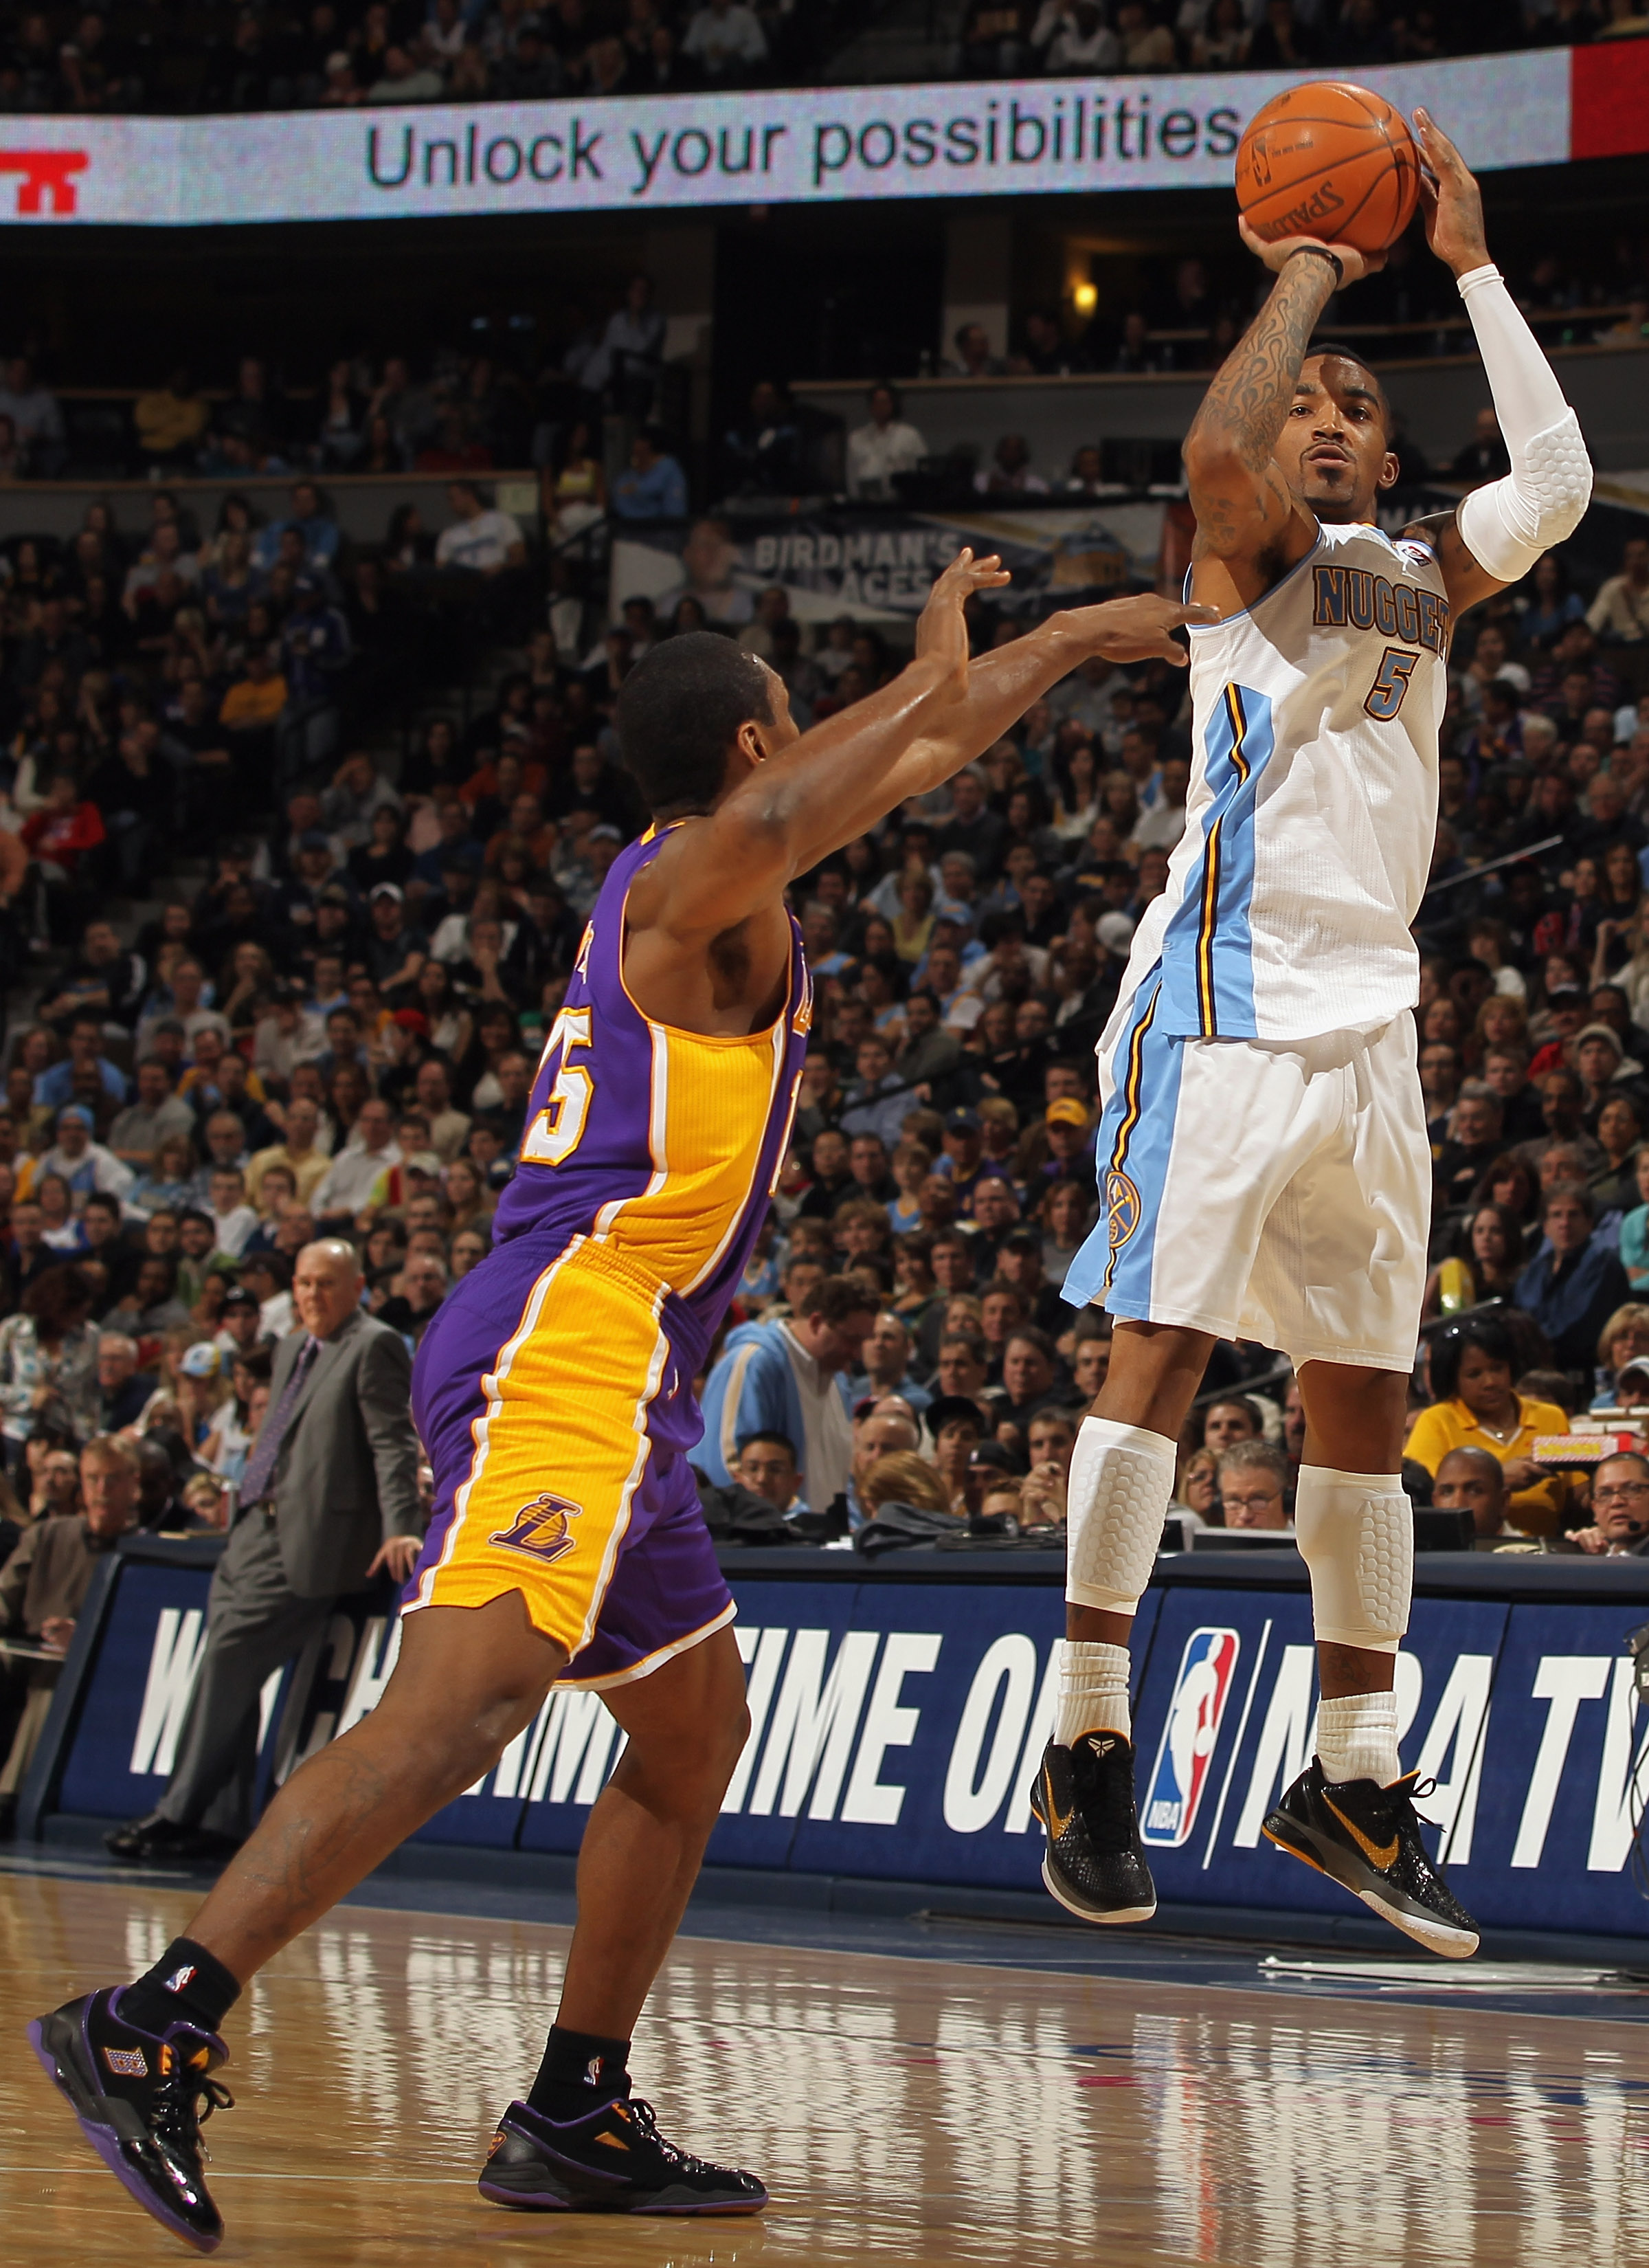 DENVER, CO - JANUARY 21:  J.R. Smith #5 of the Denver Nuggets takes a shot against Ron Artest #15 of the Los Angeles Lakers at the Pepsi Center on January 21, 2011 in Denver, Colorado. The Lakers defeated the Nuggets 107-97. NOTE TO USER: User expressly a